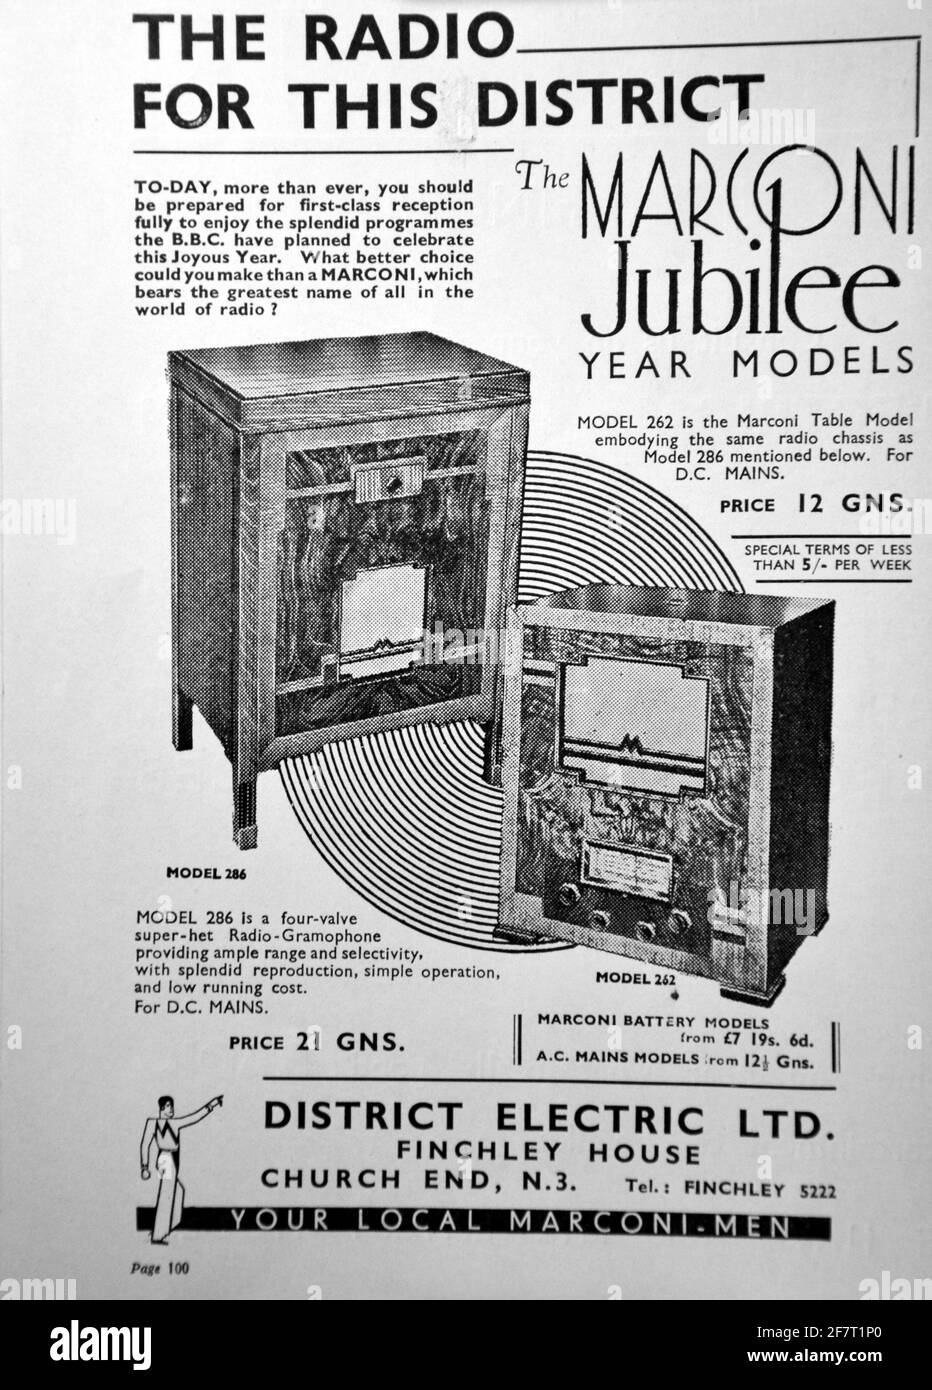 Advertisement for a Marconi radio and radio gramophone by Finchley Electric Ltd, Finchley House, Church End, London N3. From the book: 'FINCHLEY CELEBRATIONS ROYAL SILVER JUBILEE May 1935 Souvenir Handbook'. It says: 'Enjoy the splendid programmes the BBC have planned.' Stock Photo